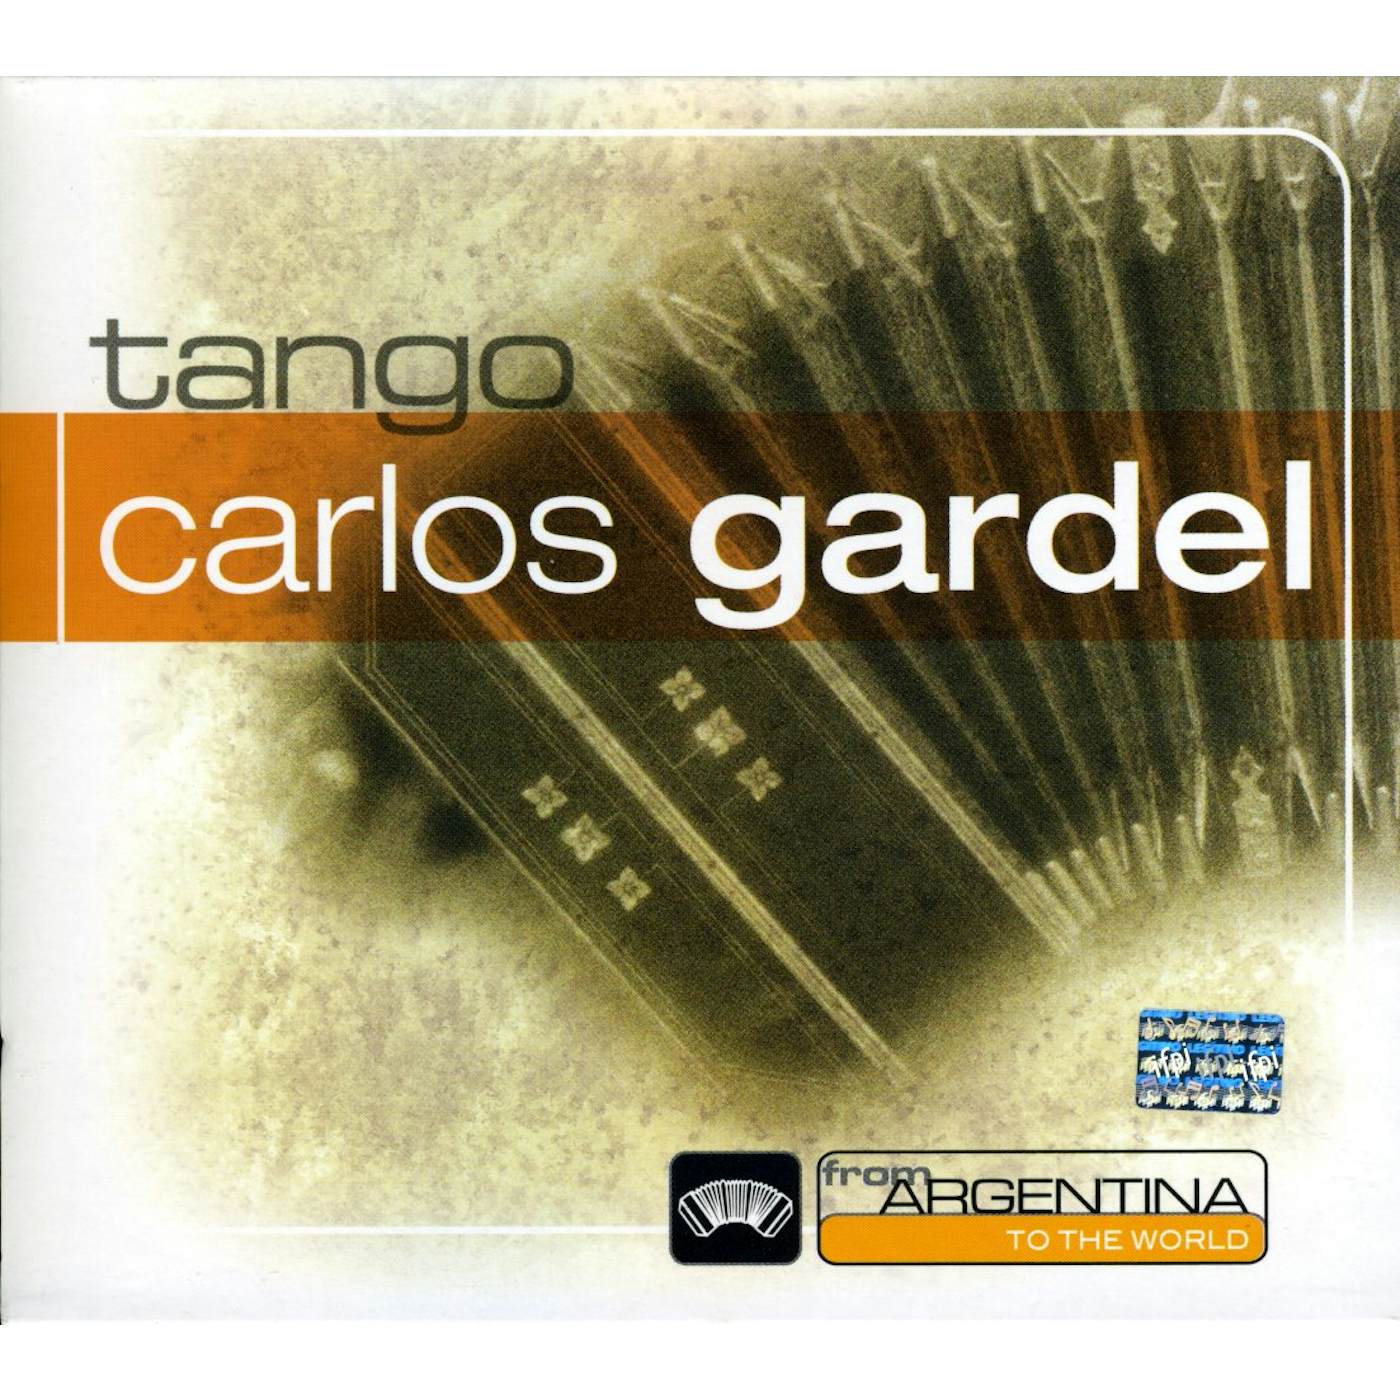 Carlos Gardel FROM ARGENTINA TO THE WORLD CD